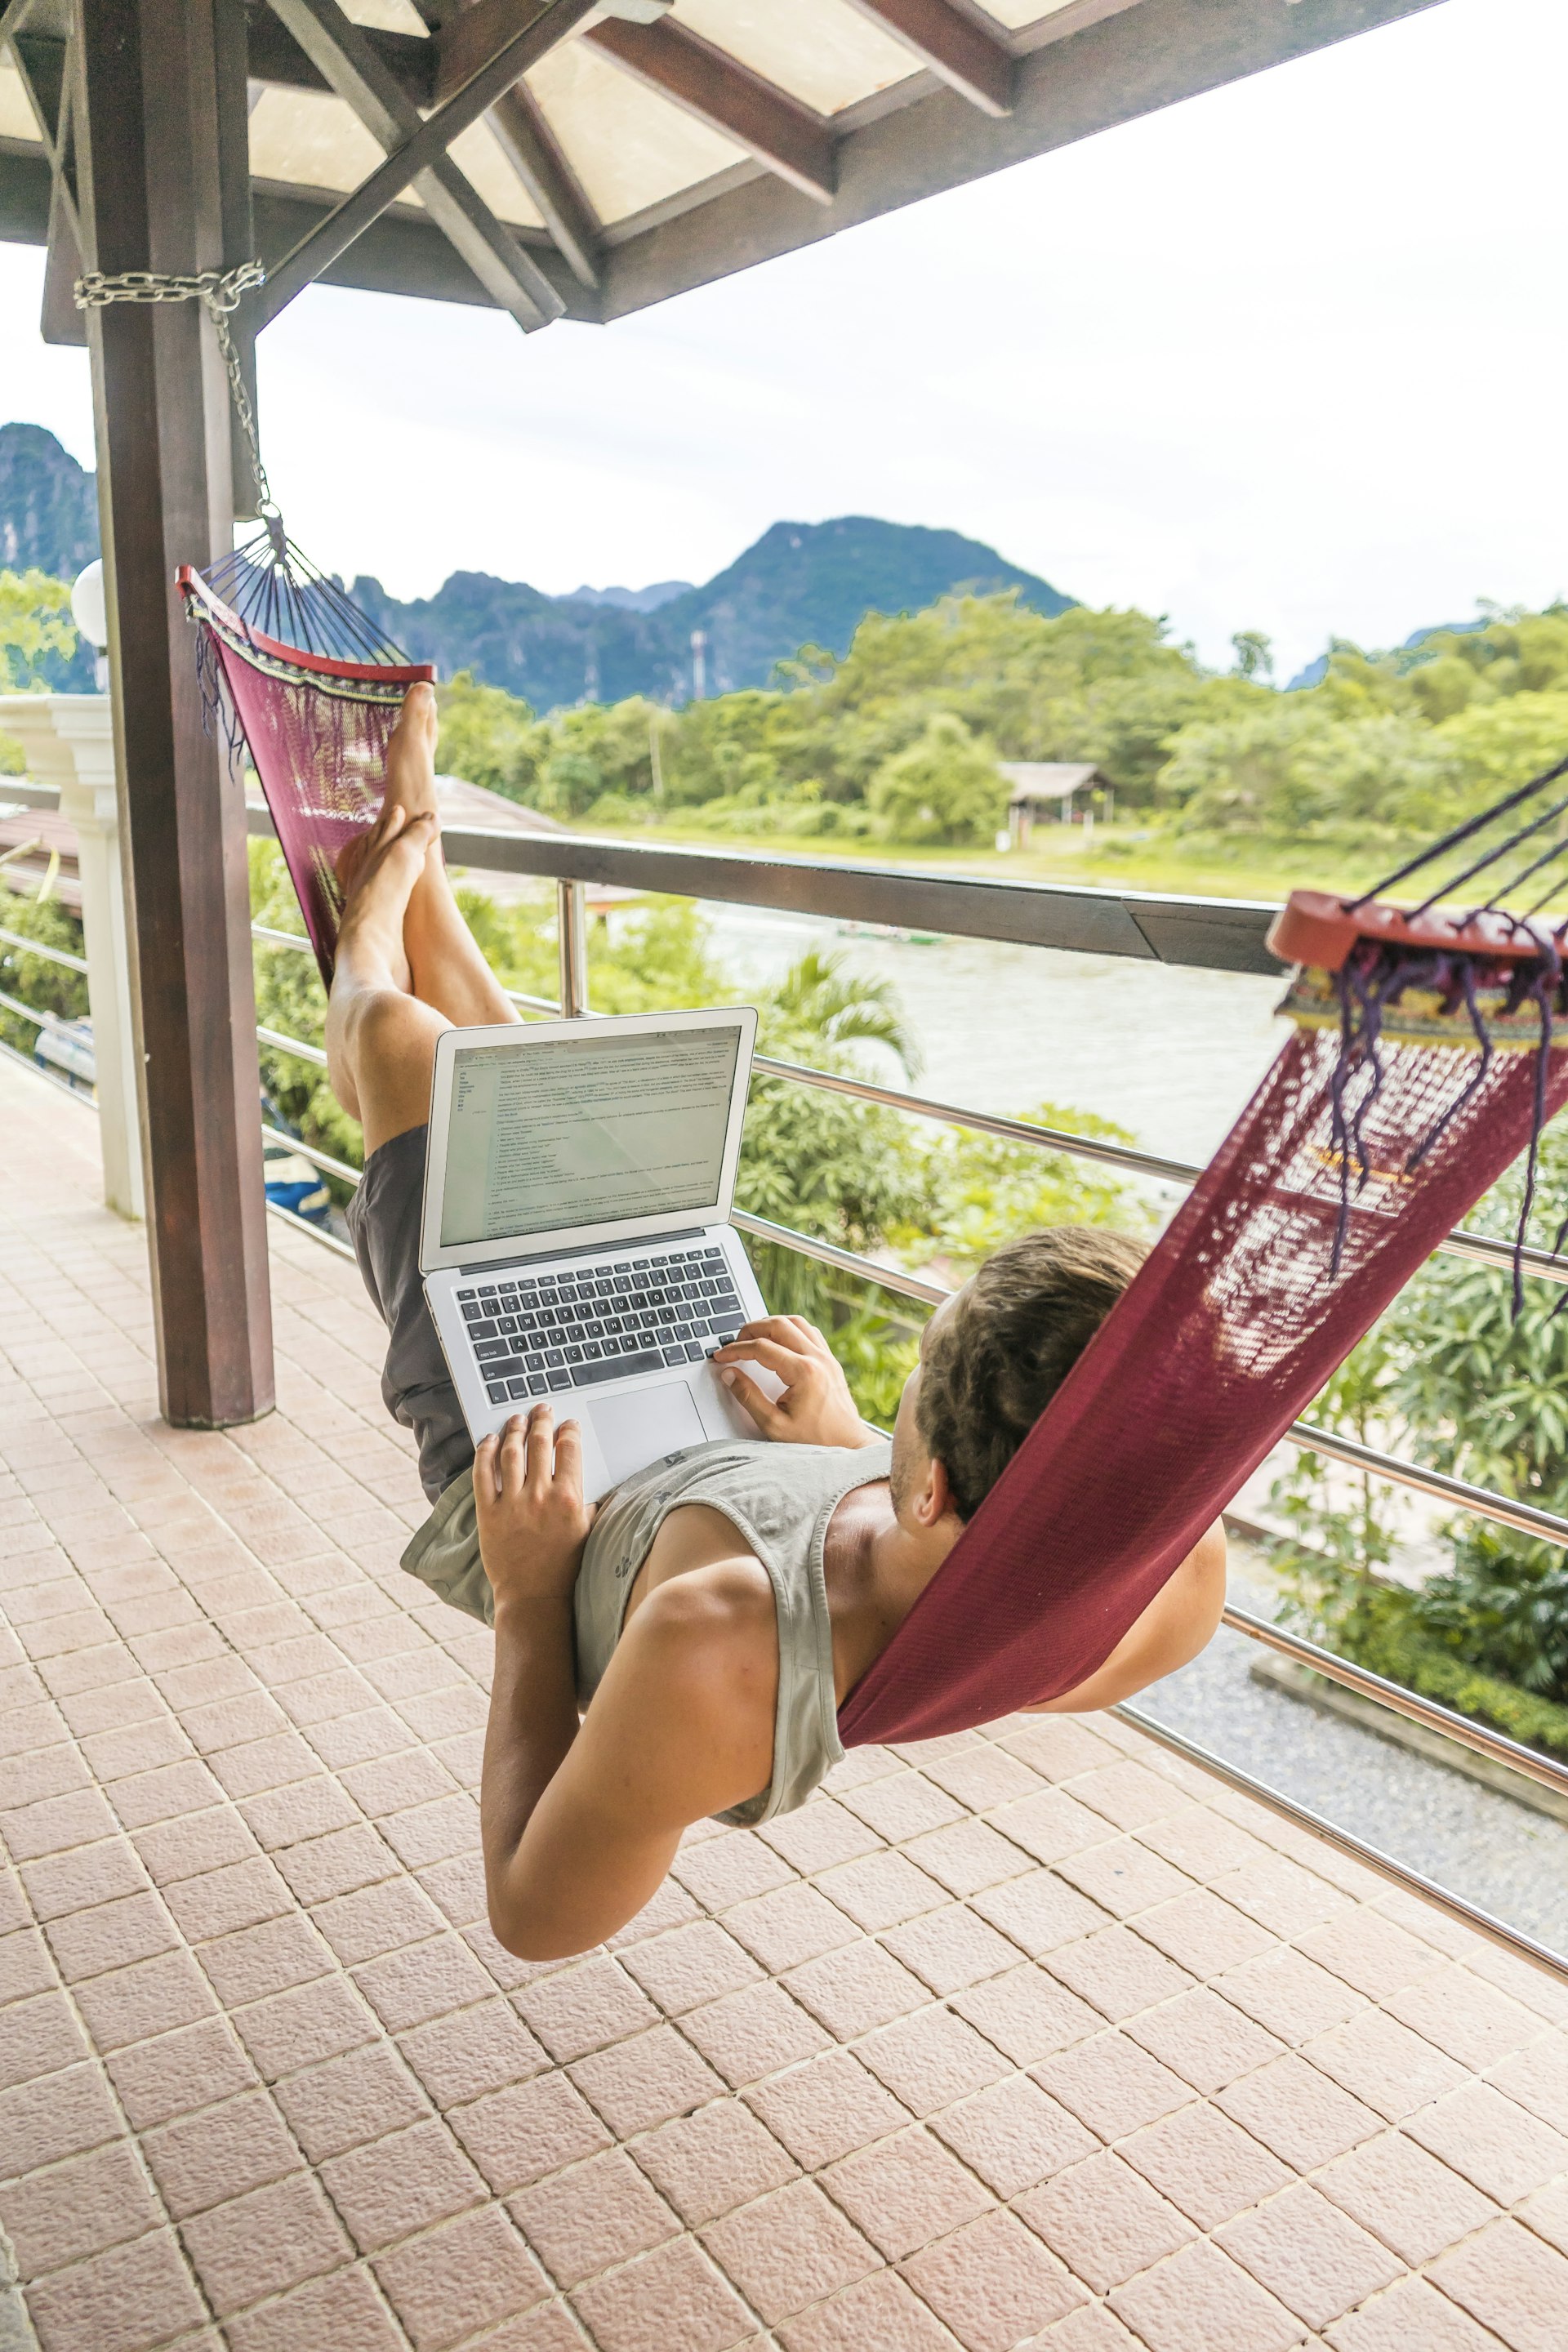 A young man lying in hammock that hangs on a balcony near a river. A laptop is balanced on his legs